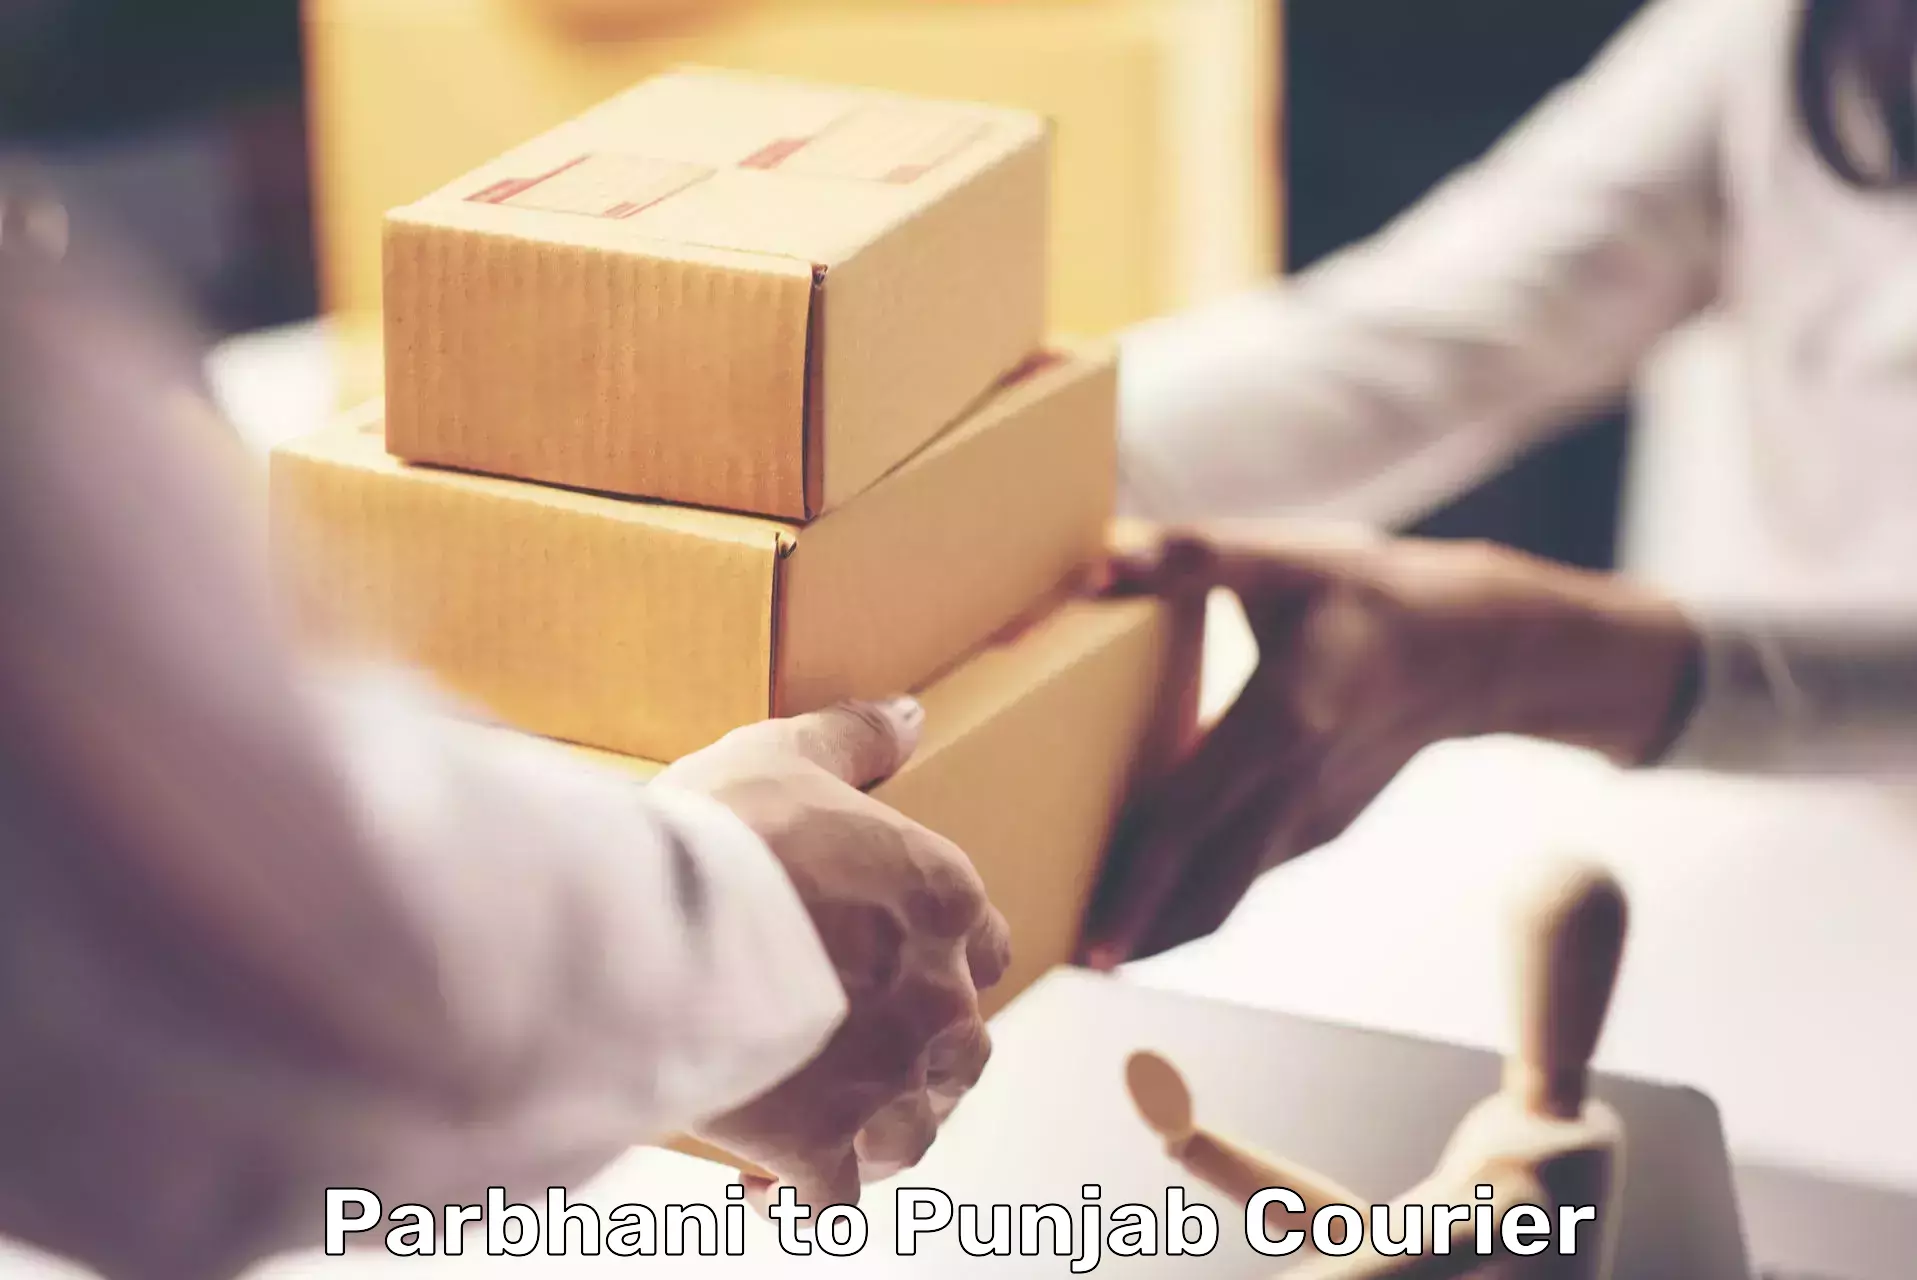 Courier services in Parbhani to Patiala